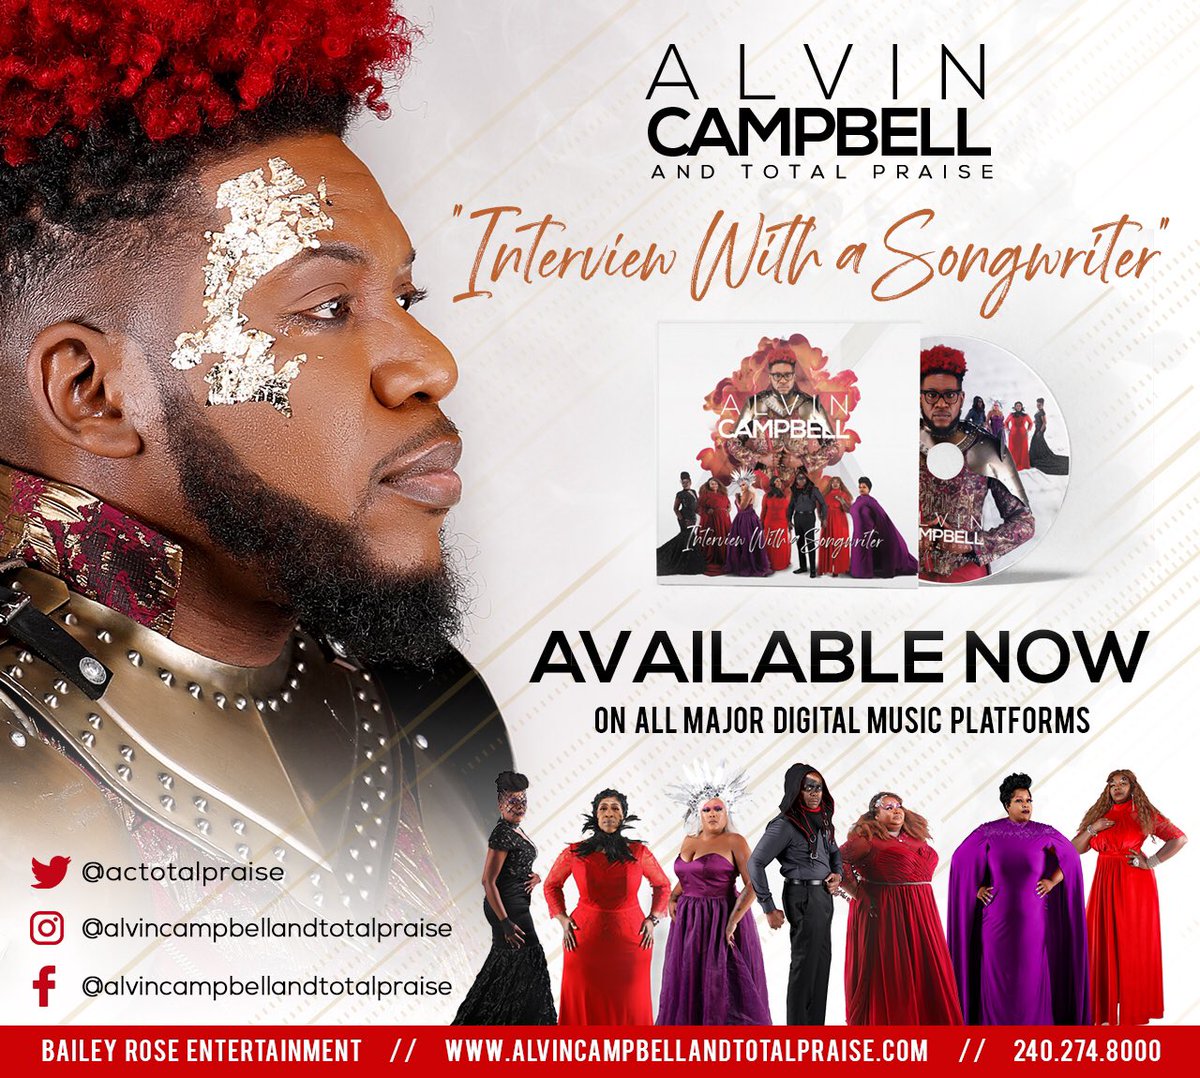 🔥🔥NOW AVAILABLE🔥🔥
I’d like to thank everyone that prayed with us!

We hope you have as much fun listening as we did making it!
Thanks for your support!!!

#HearOurHeart #ShareOurJoy #InterviewWithaSongwriter #alvincampbellandtotalpraise #hungryboiproductions #newmusicalert